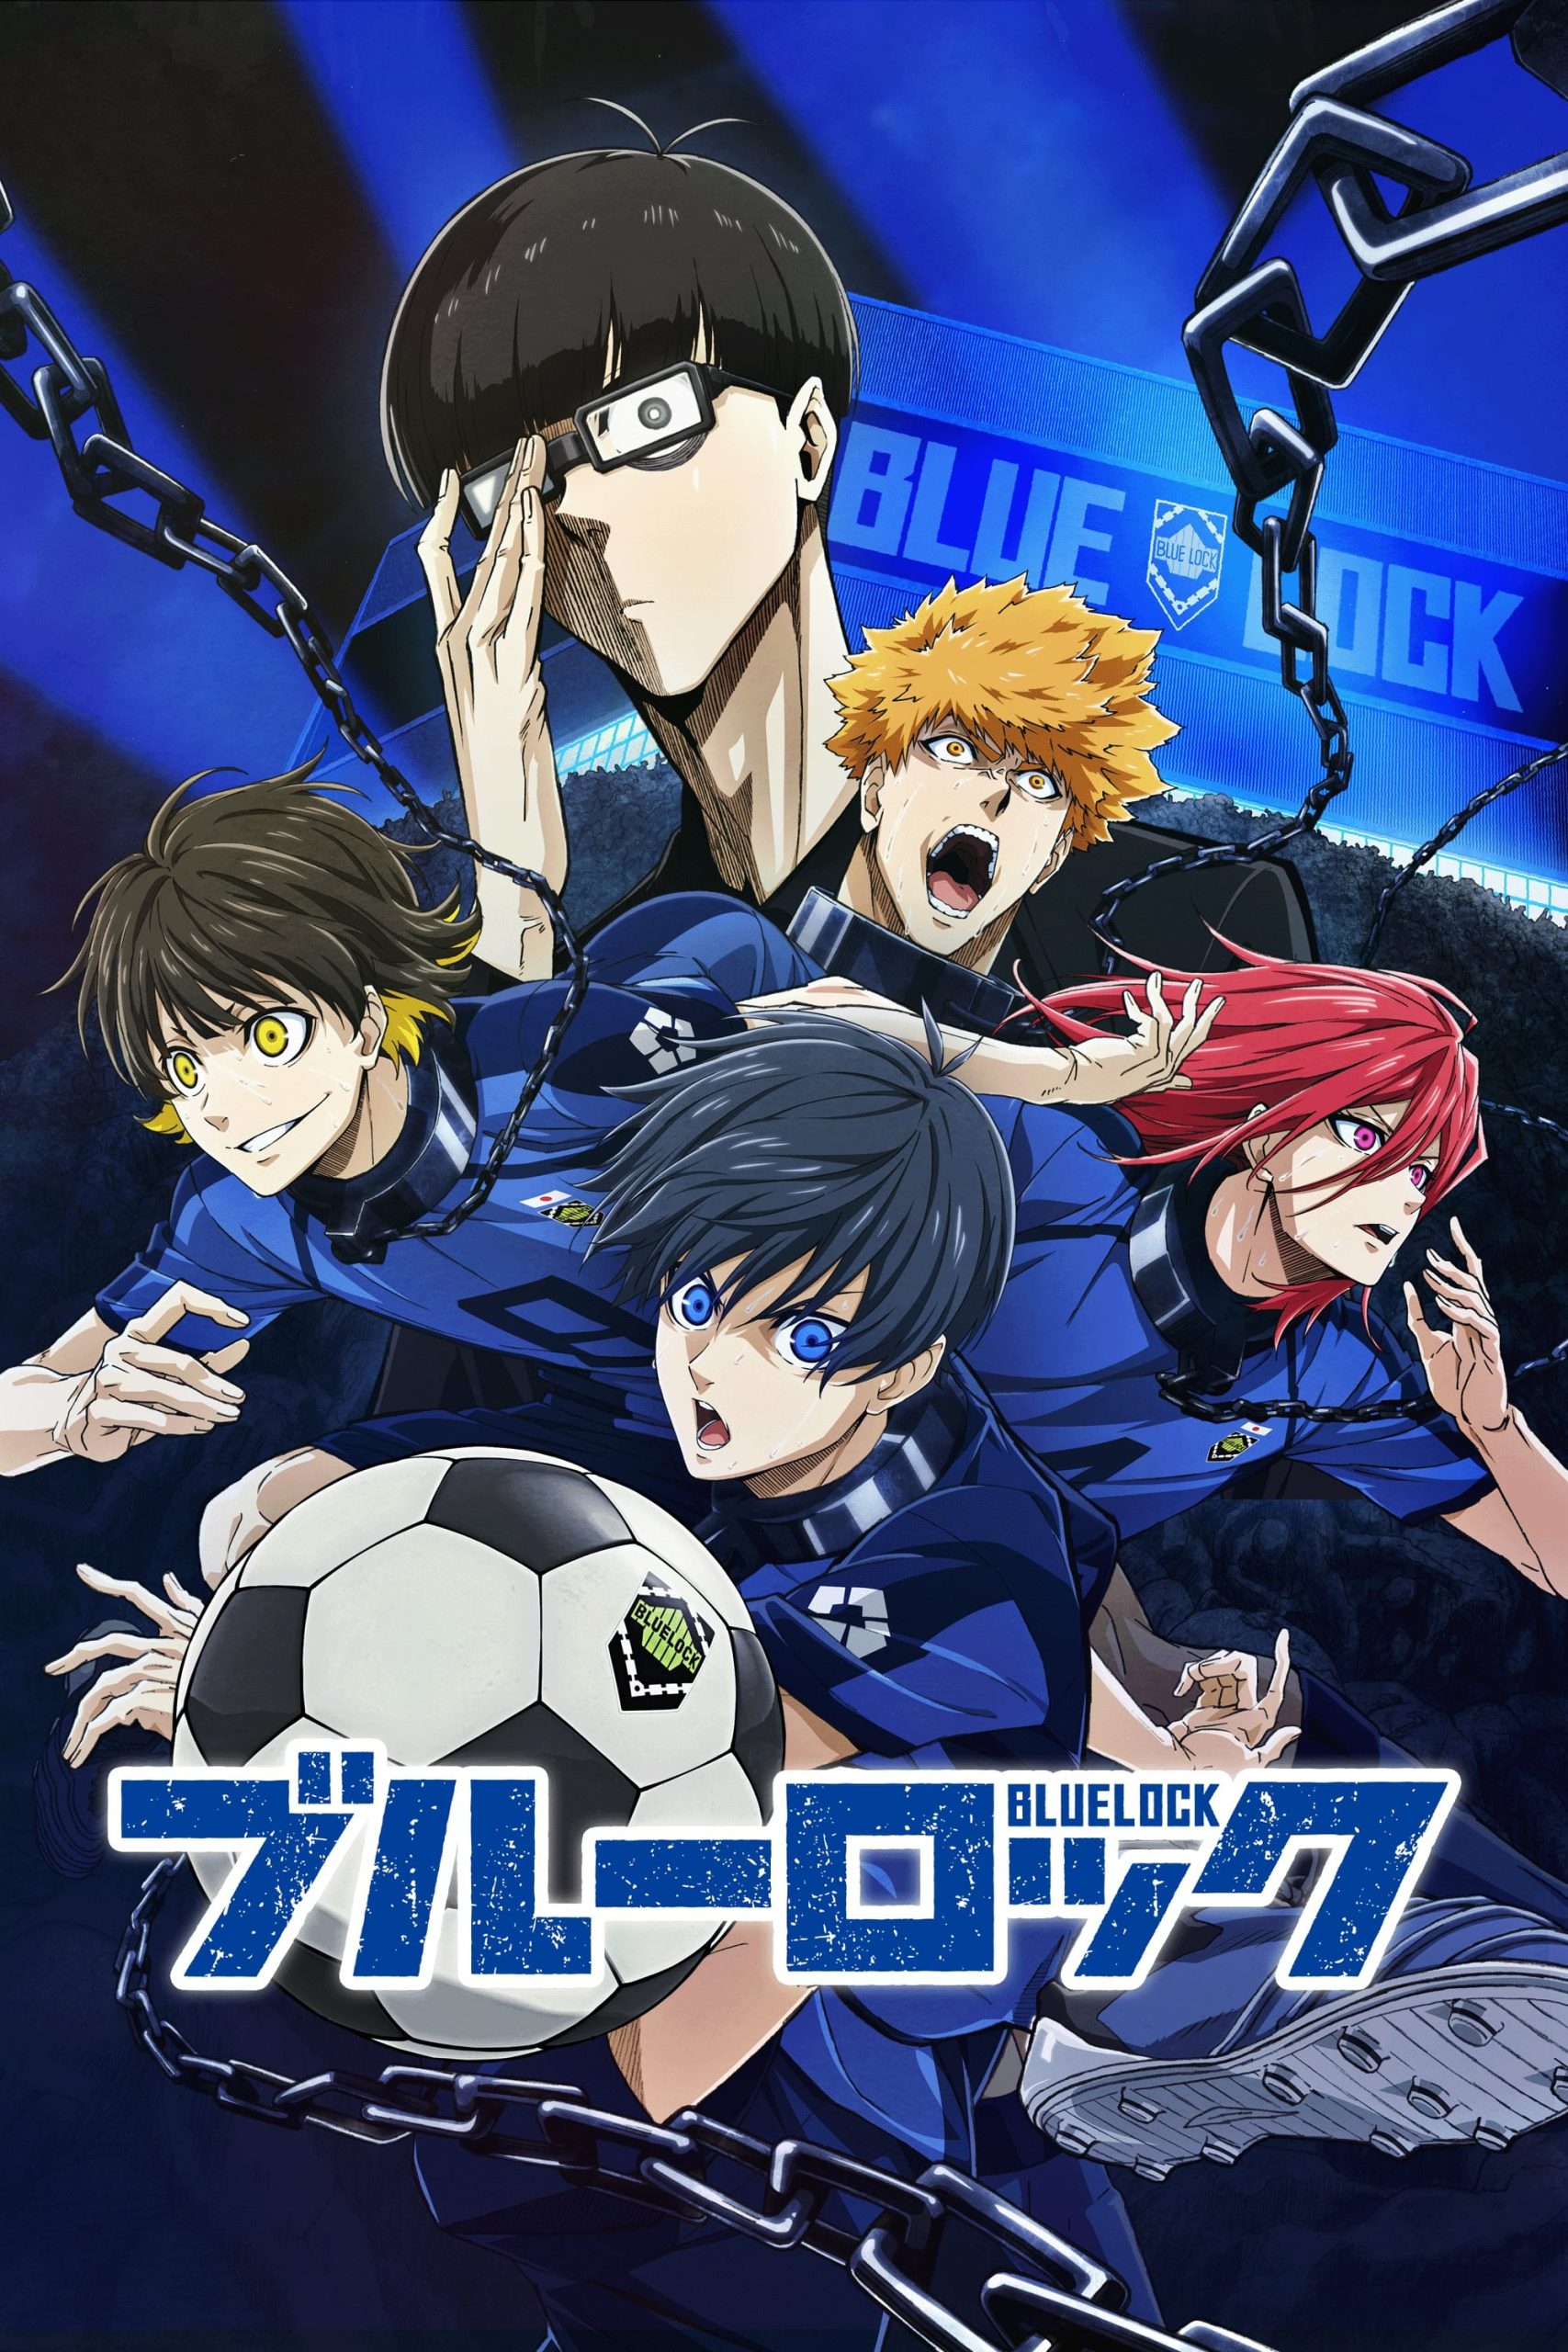 Watch Bluelock English Subbed/Dubbed online Free On Simple Anime